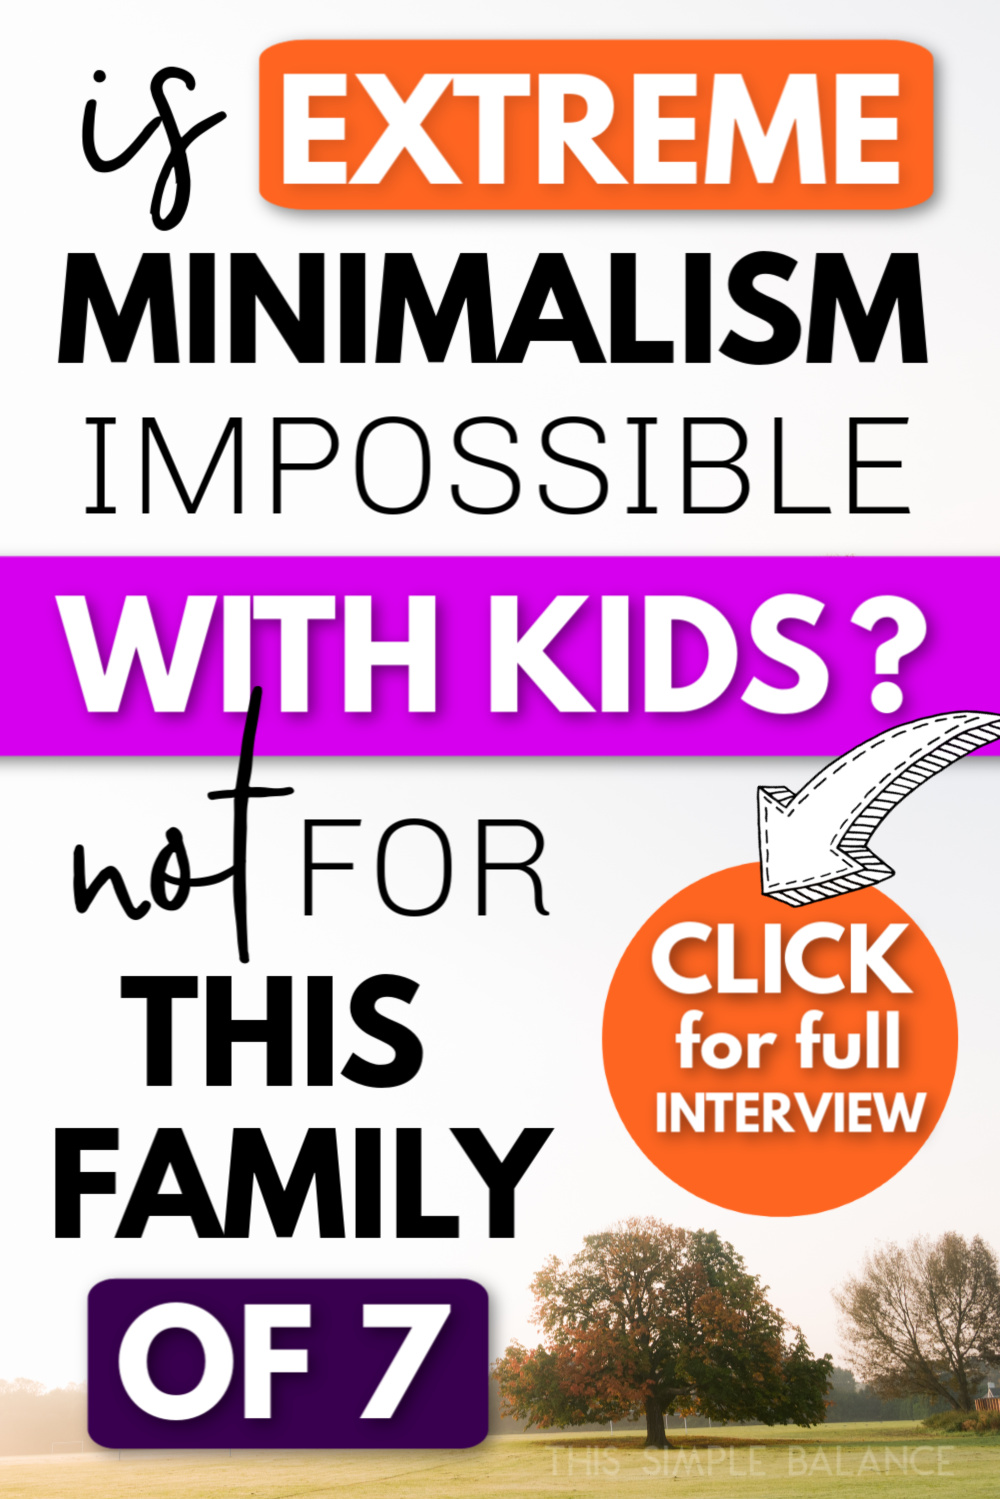 tree in field with text overlay "is extreme minimalism impossible with kids? not for this family of 7"